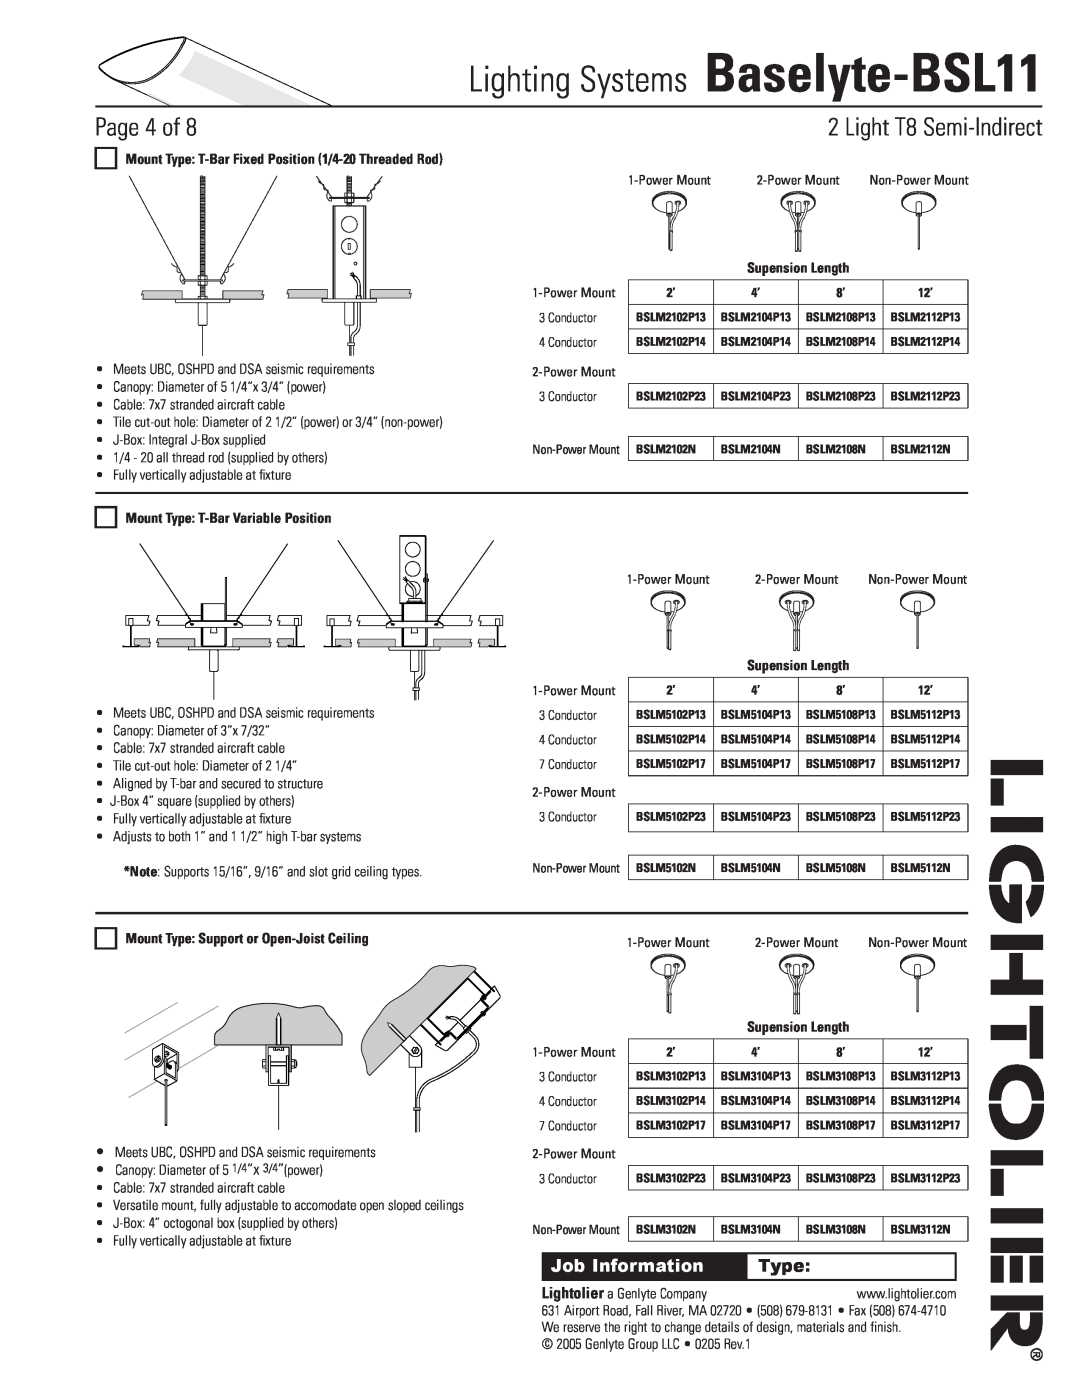 Lightolier Baselyte-BSL11 Page of, Mount Type T-BarVariable Position, Mount Type Support or Open-JoistCeiling 